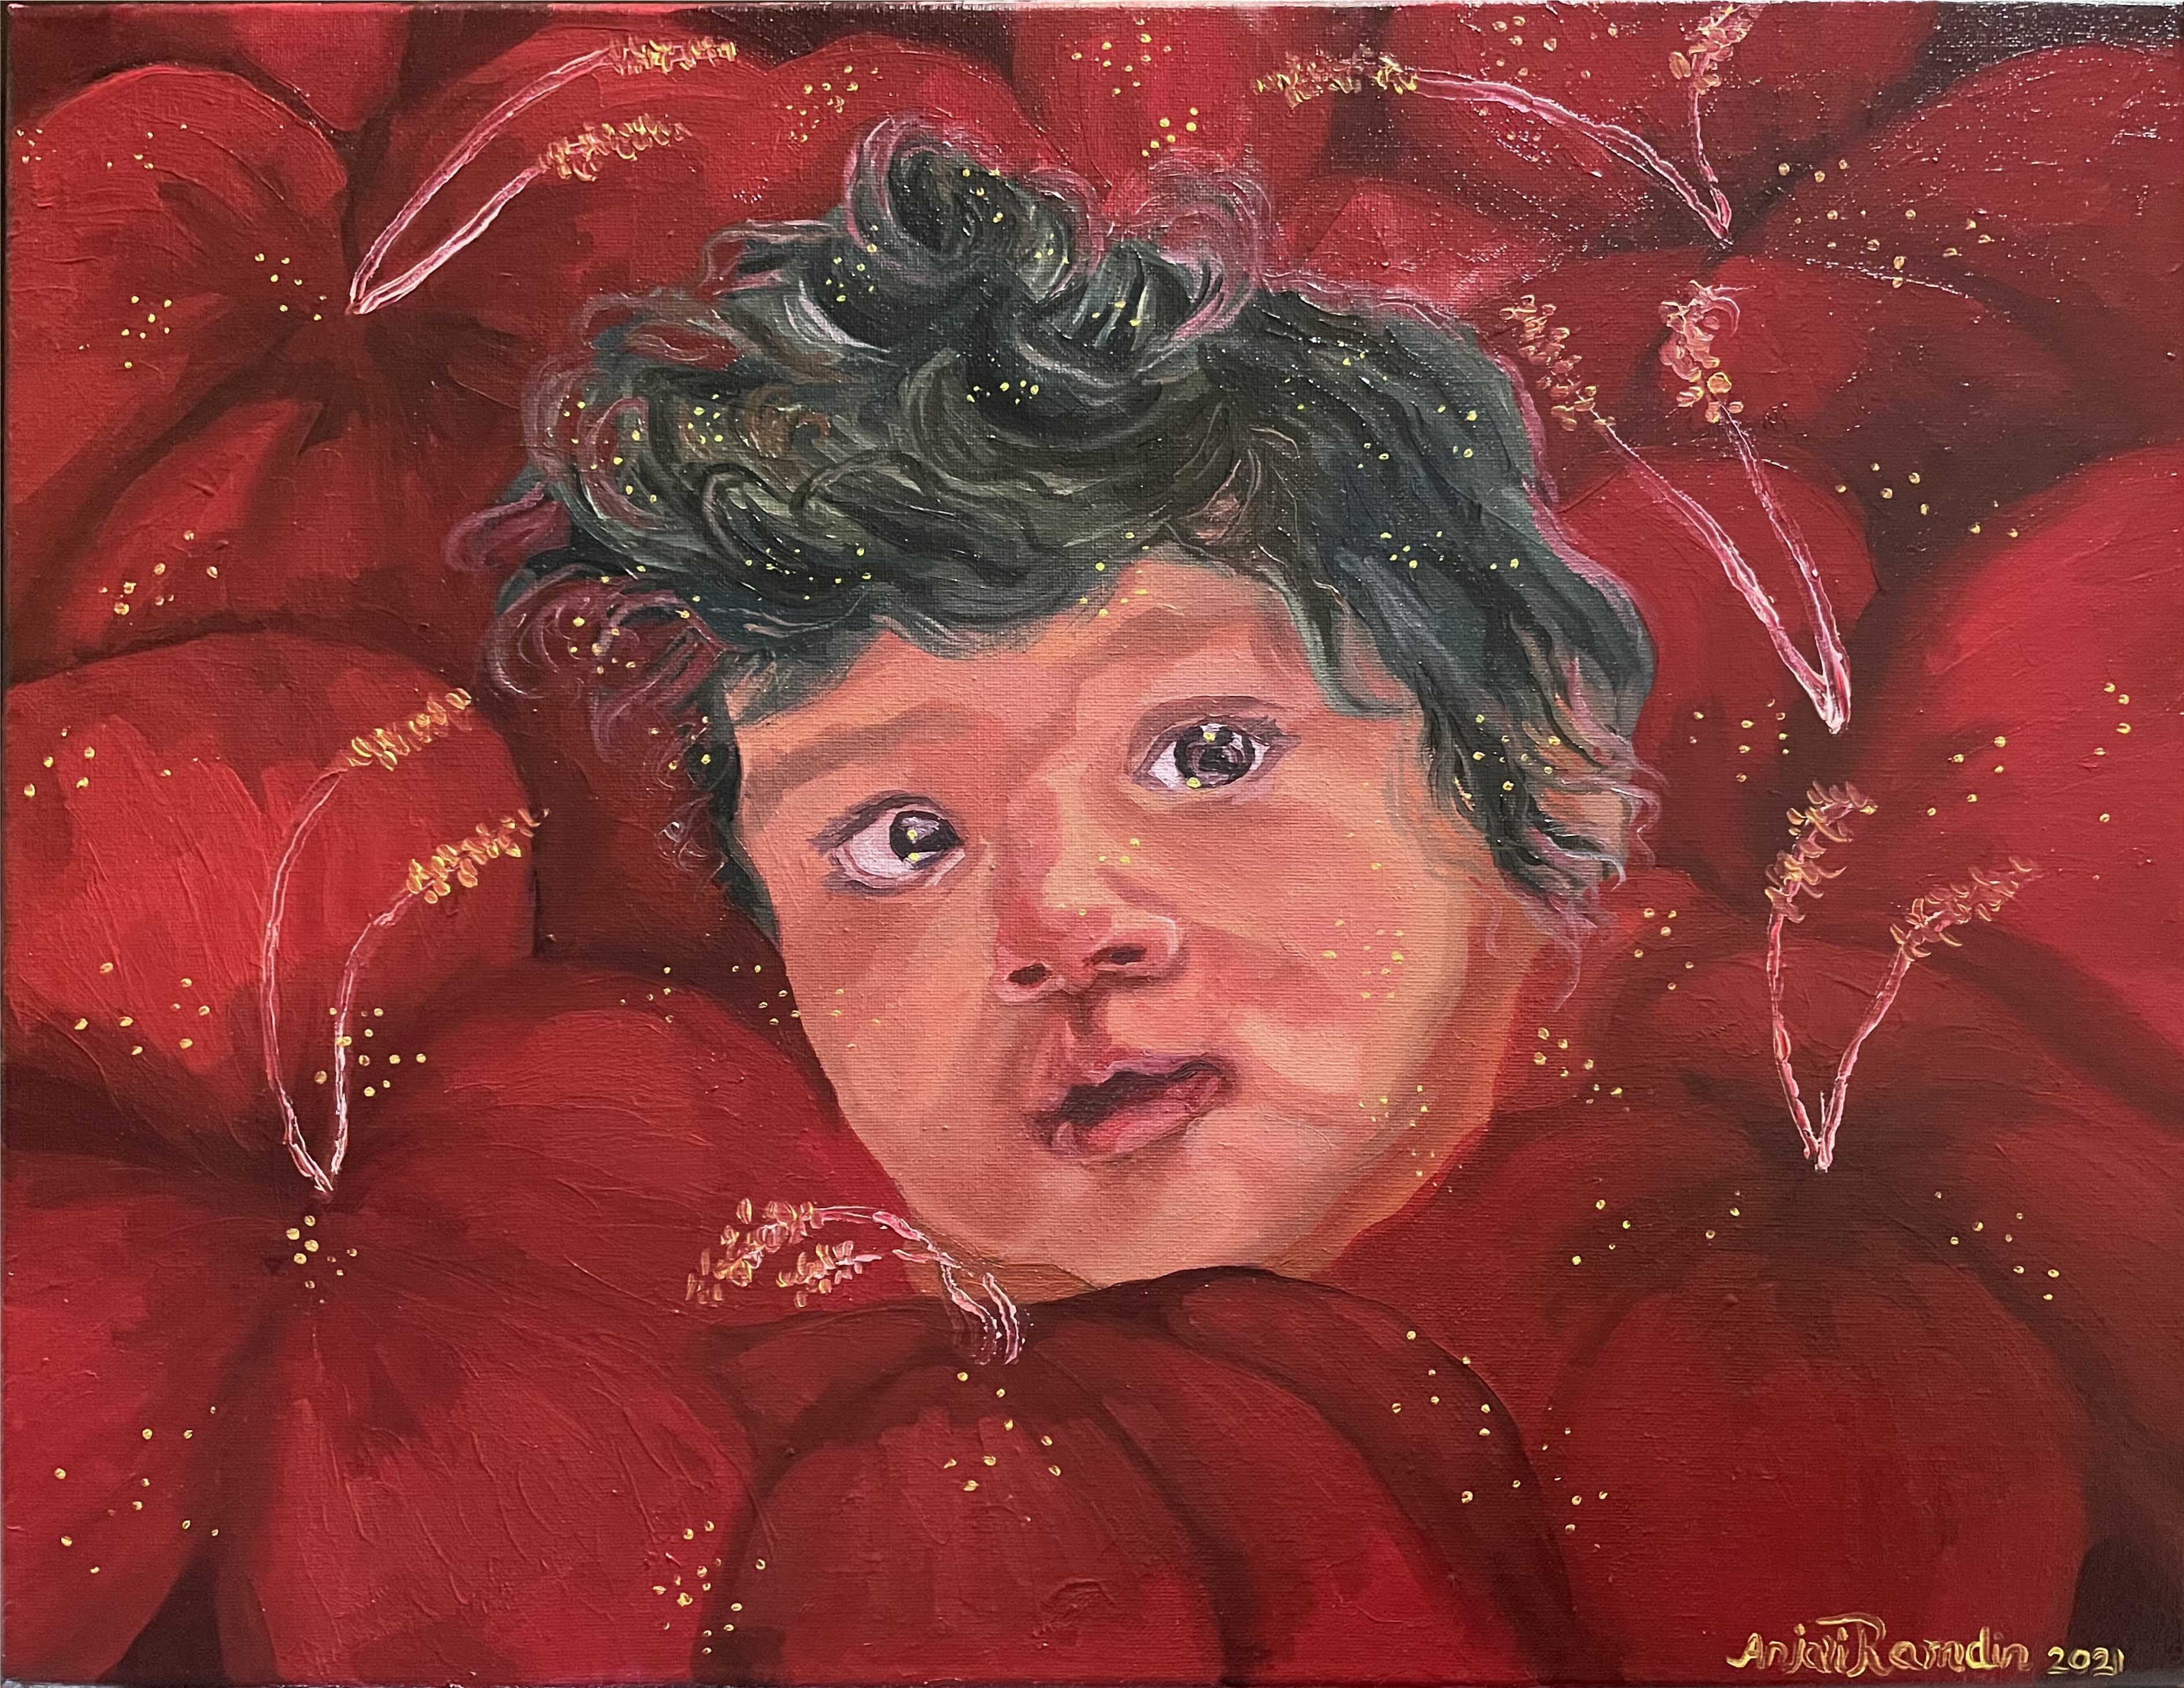 A painting of a young child